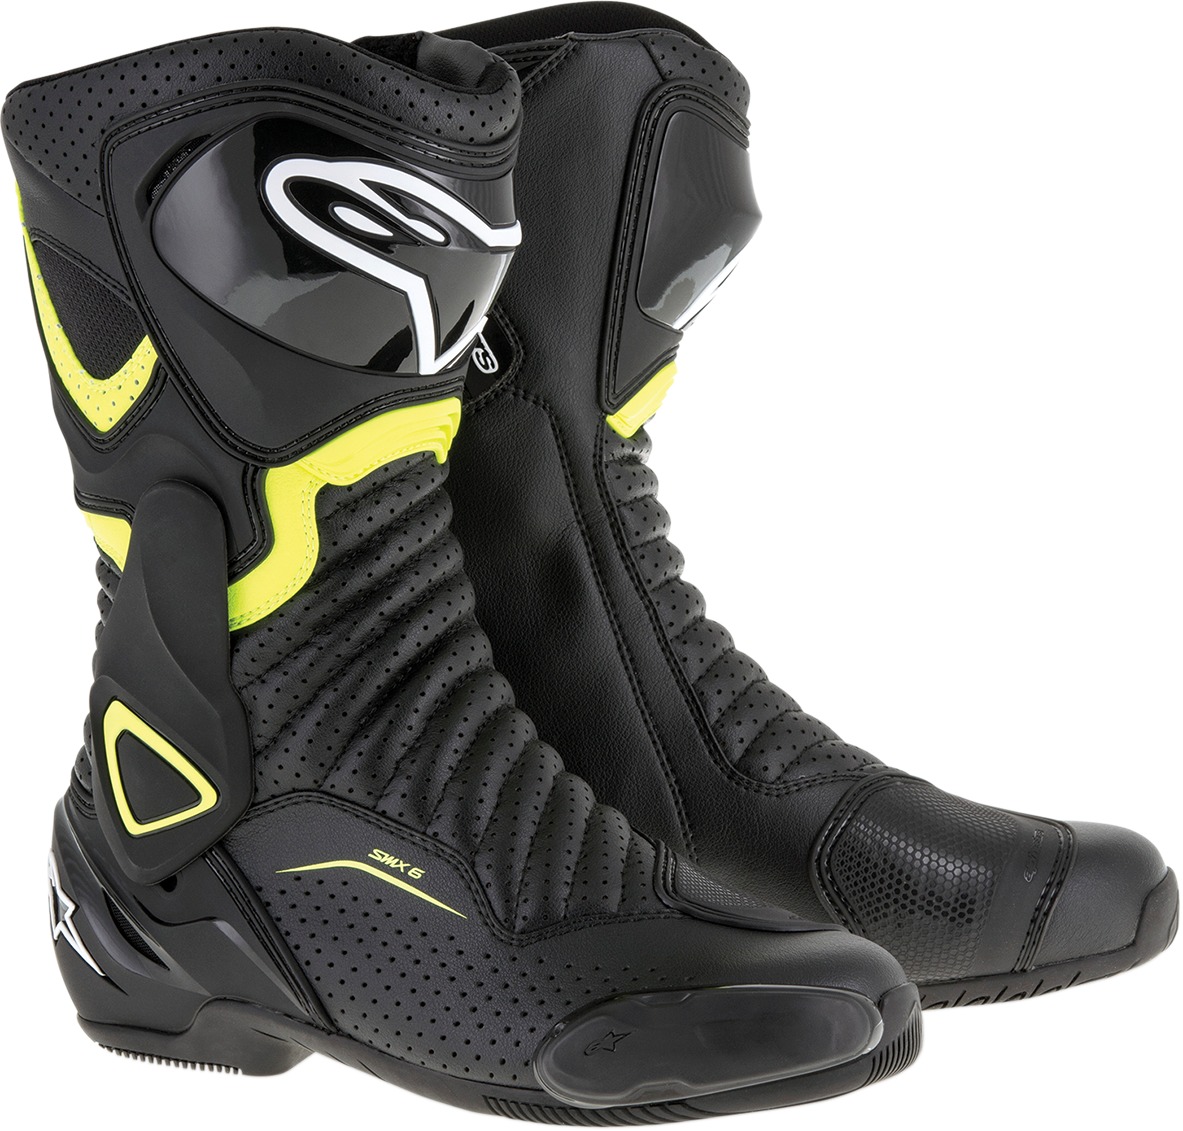 SMX-6v2 Vented Street Riding Boots Black/Yellow US 12.5 - Click Image to Close